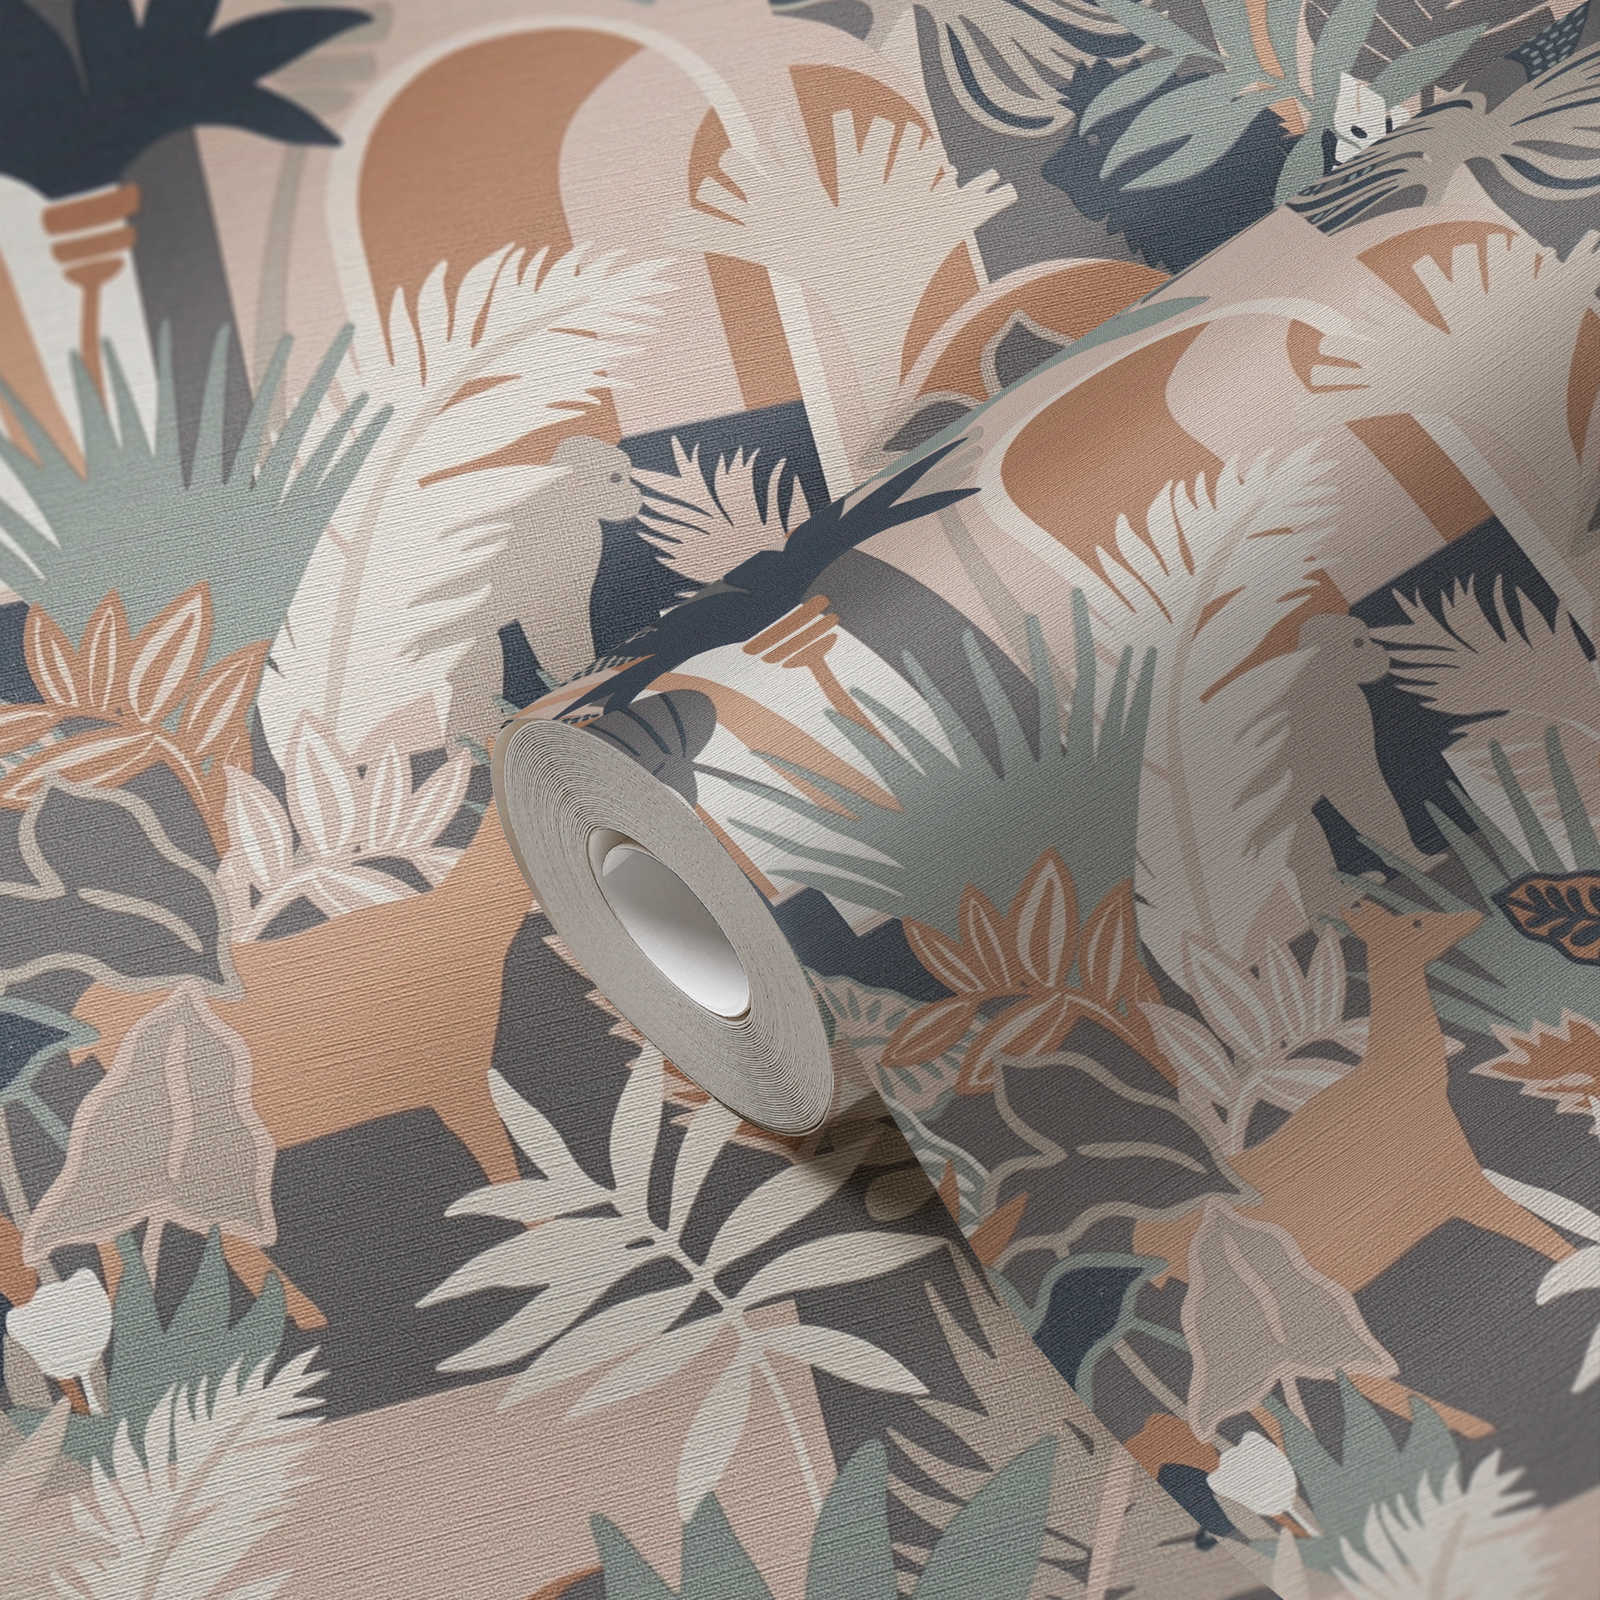             Non-woven wallpaper in subtle colours with animals - multicoloured, brown, pink
        